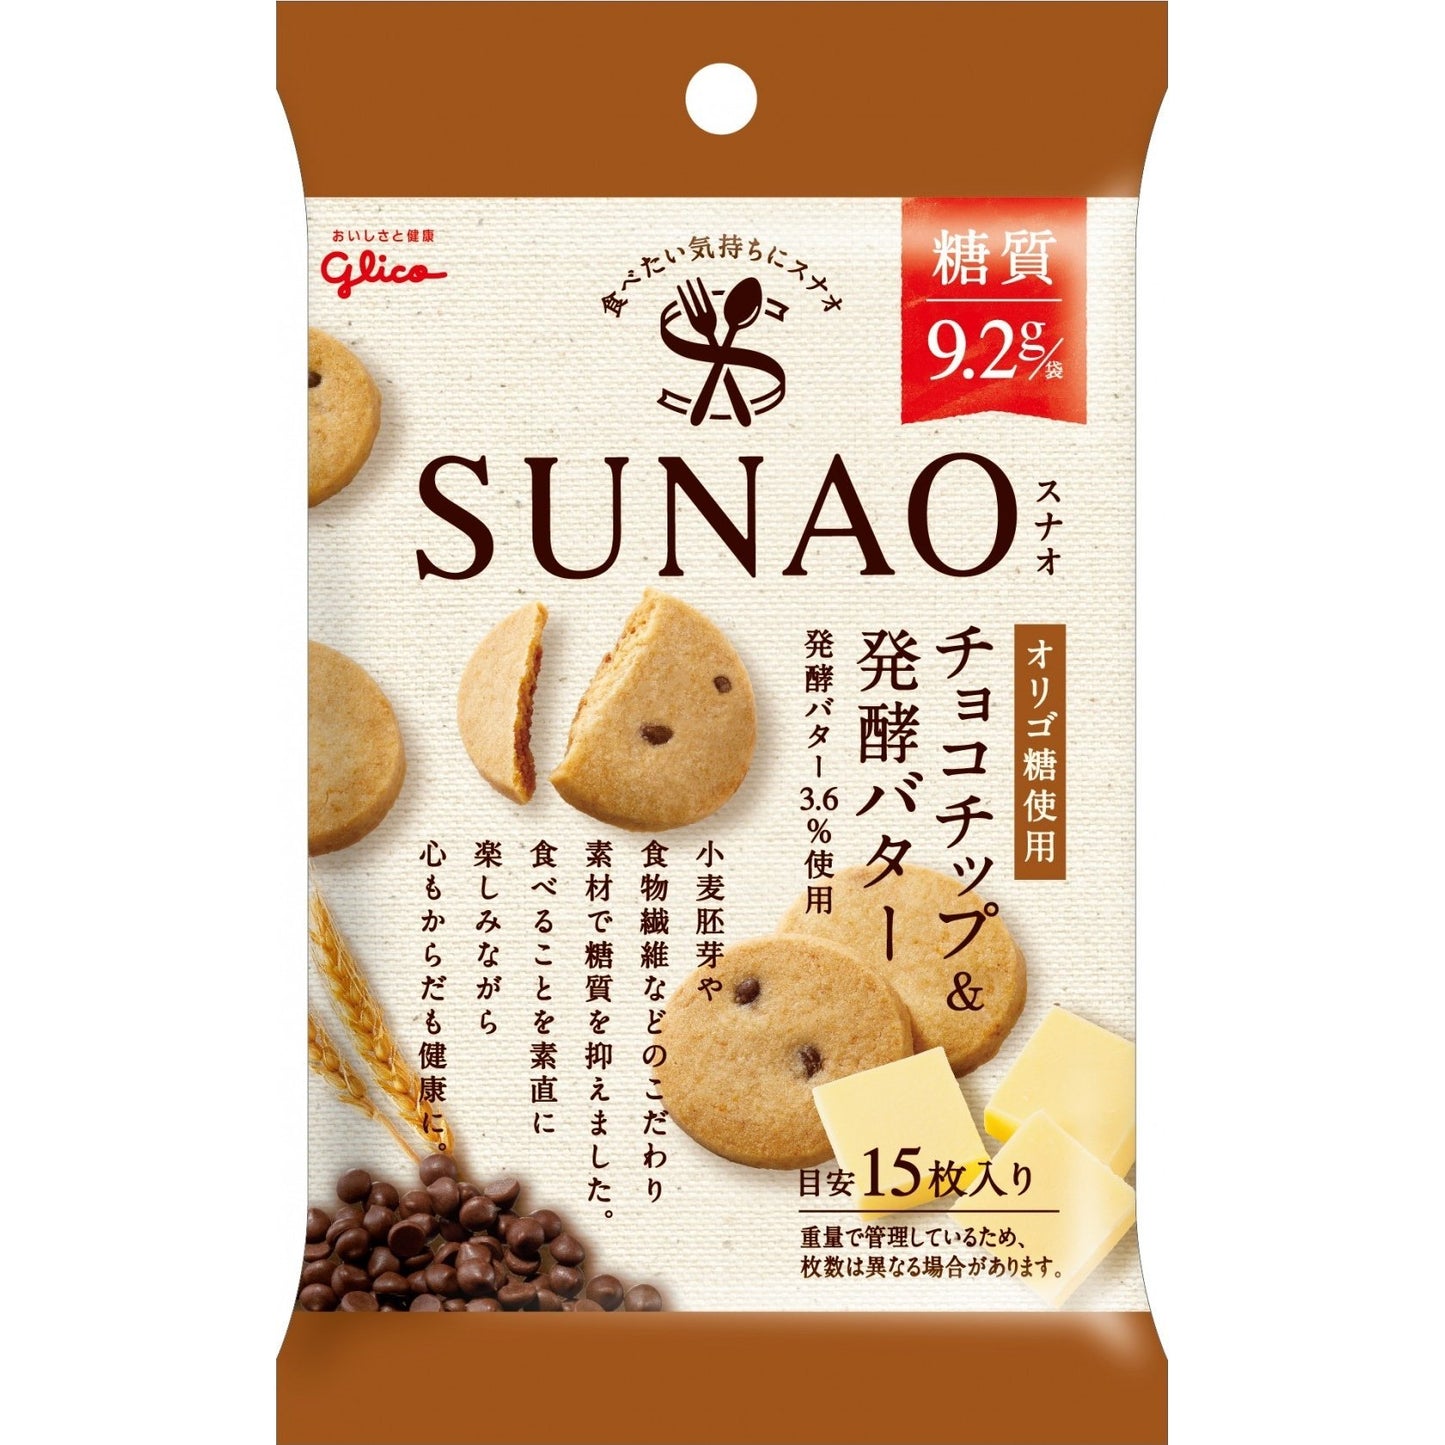 [Glico][SUNAO chocolate chips & fermented butter][Sachet]